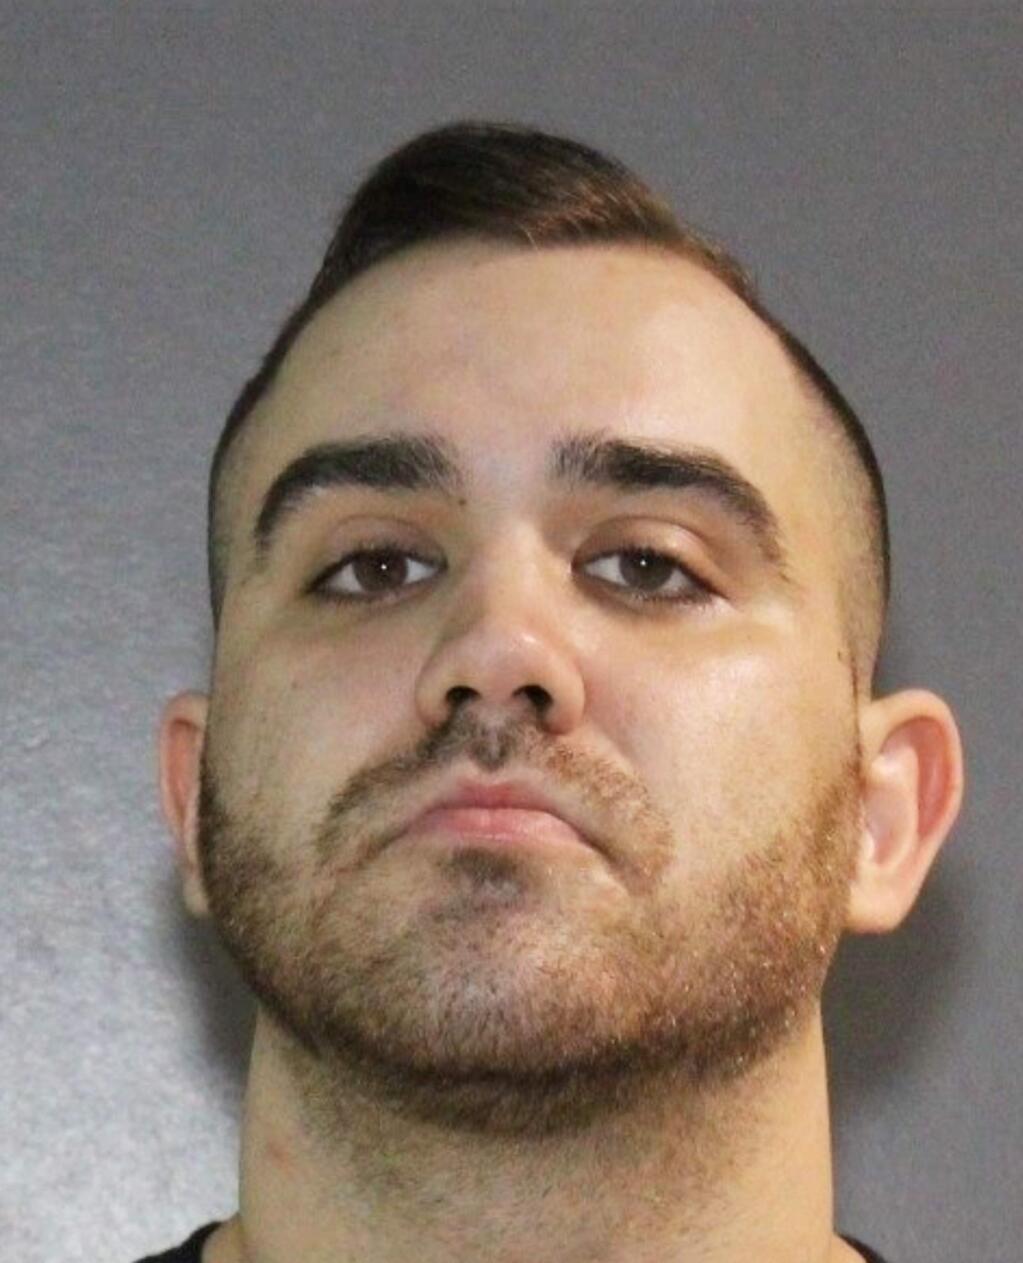 This undated photo provided by the Royal Canadian Mounted Police Integrated Homicide Investigation Team (RCMP/IHIT) shows Brandon Teixeira. California officials say they have arrested Teixeira, a Canadian man wanted on a murder charge in that country. The Butte County Sheriff's Office says Teixeira, 28, was arrested Sunday, Dec. 1, 2019 in Oroville, Calif. The office said Monday that Teixeria was one of British Columbia's most wanted fugitives. The Canadian Broadcasting Corporation reports Teixeira is facing a charge of first-degree murder in a 2007 shooting death. (RCMP/IHIT via AP)